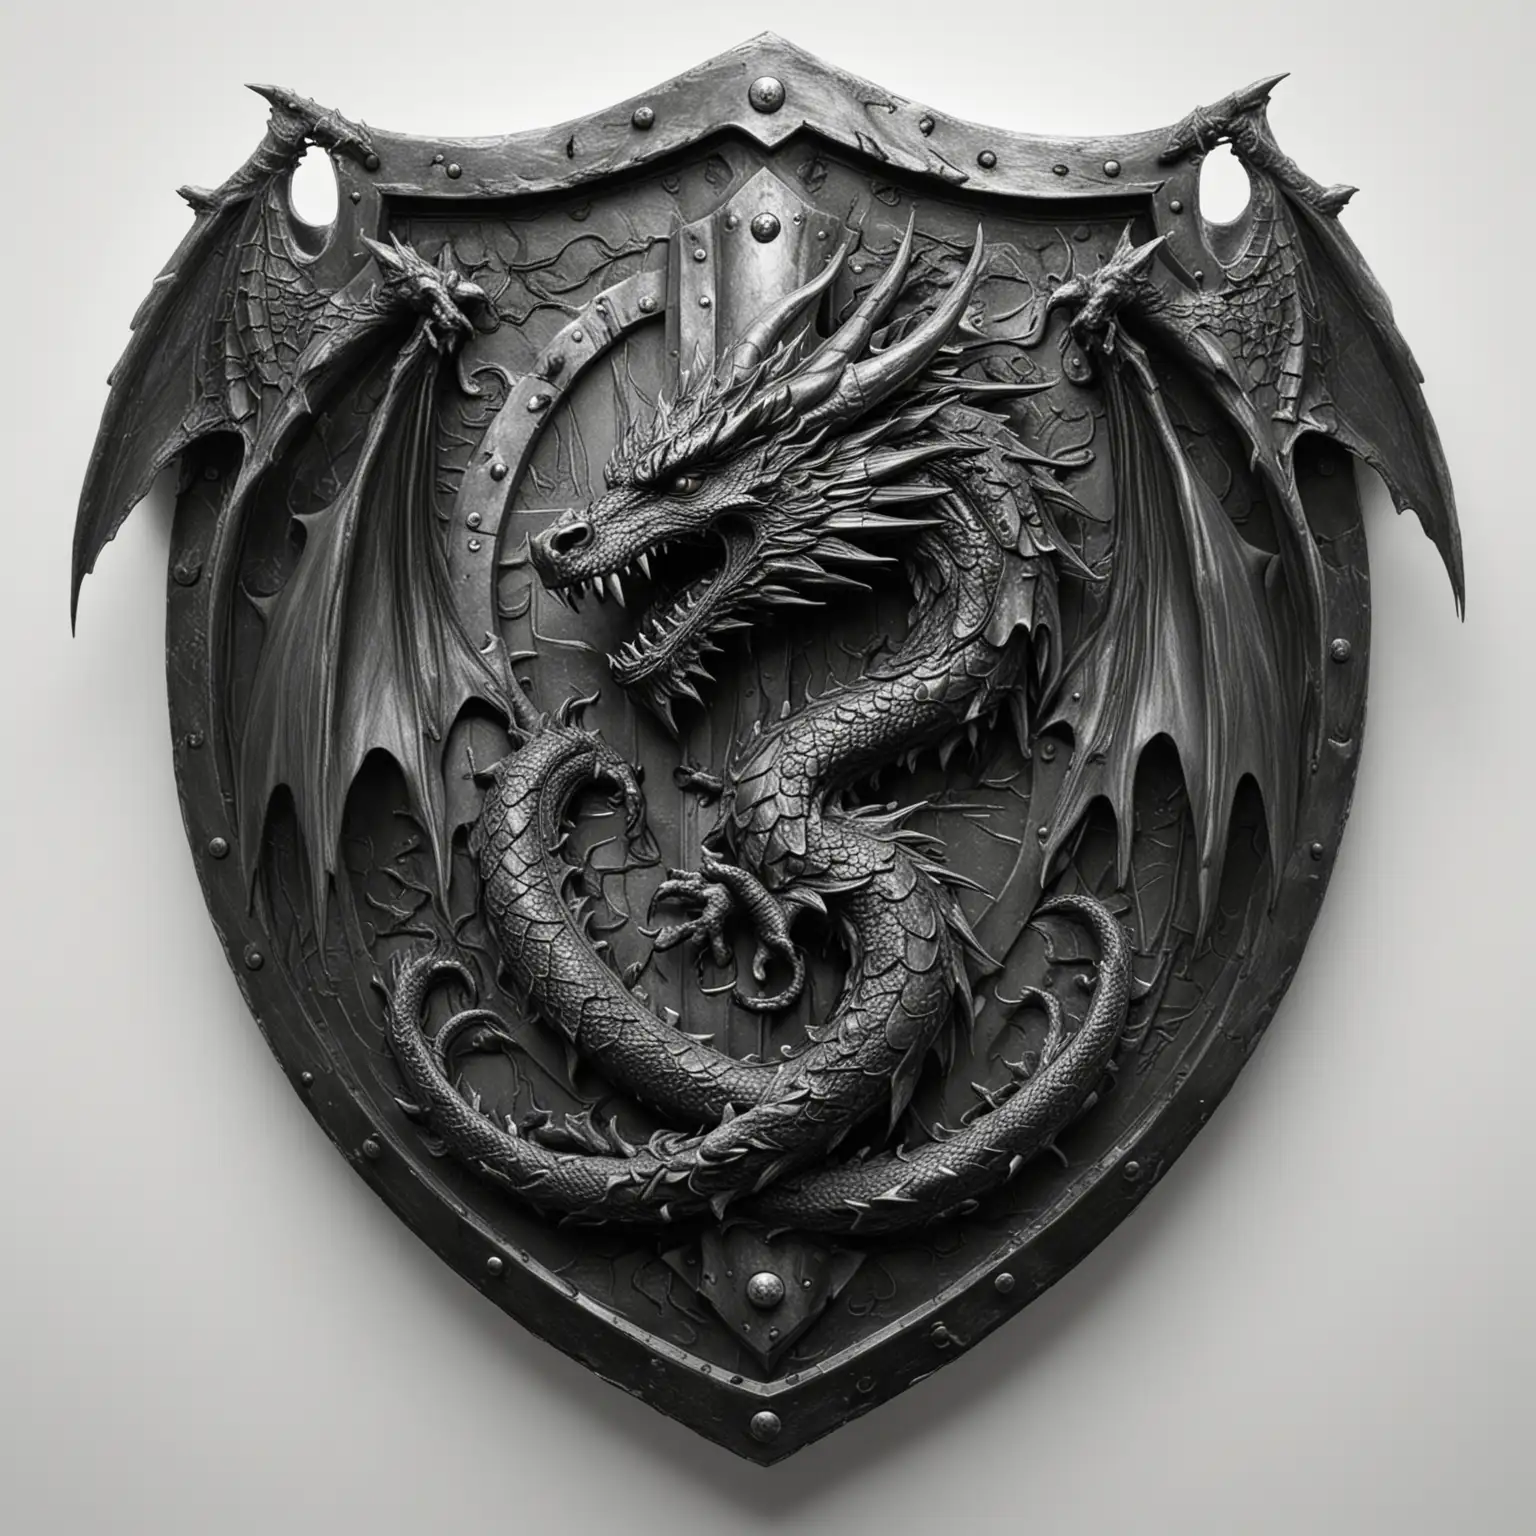 HighQuality-Black-Shield-with-Dragon-Design-on-White-Background